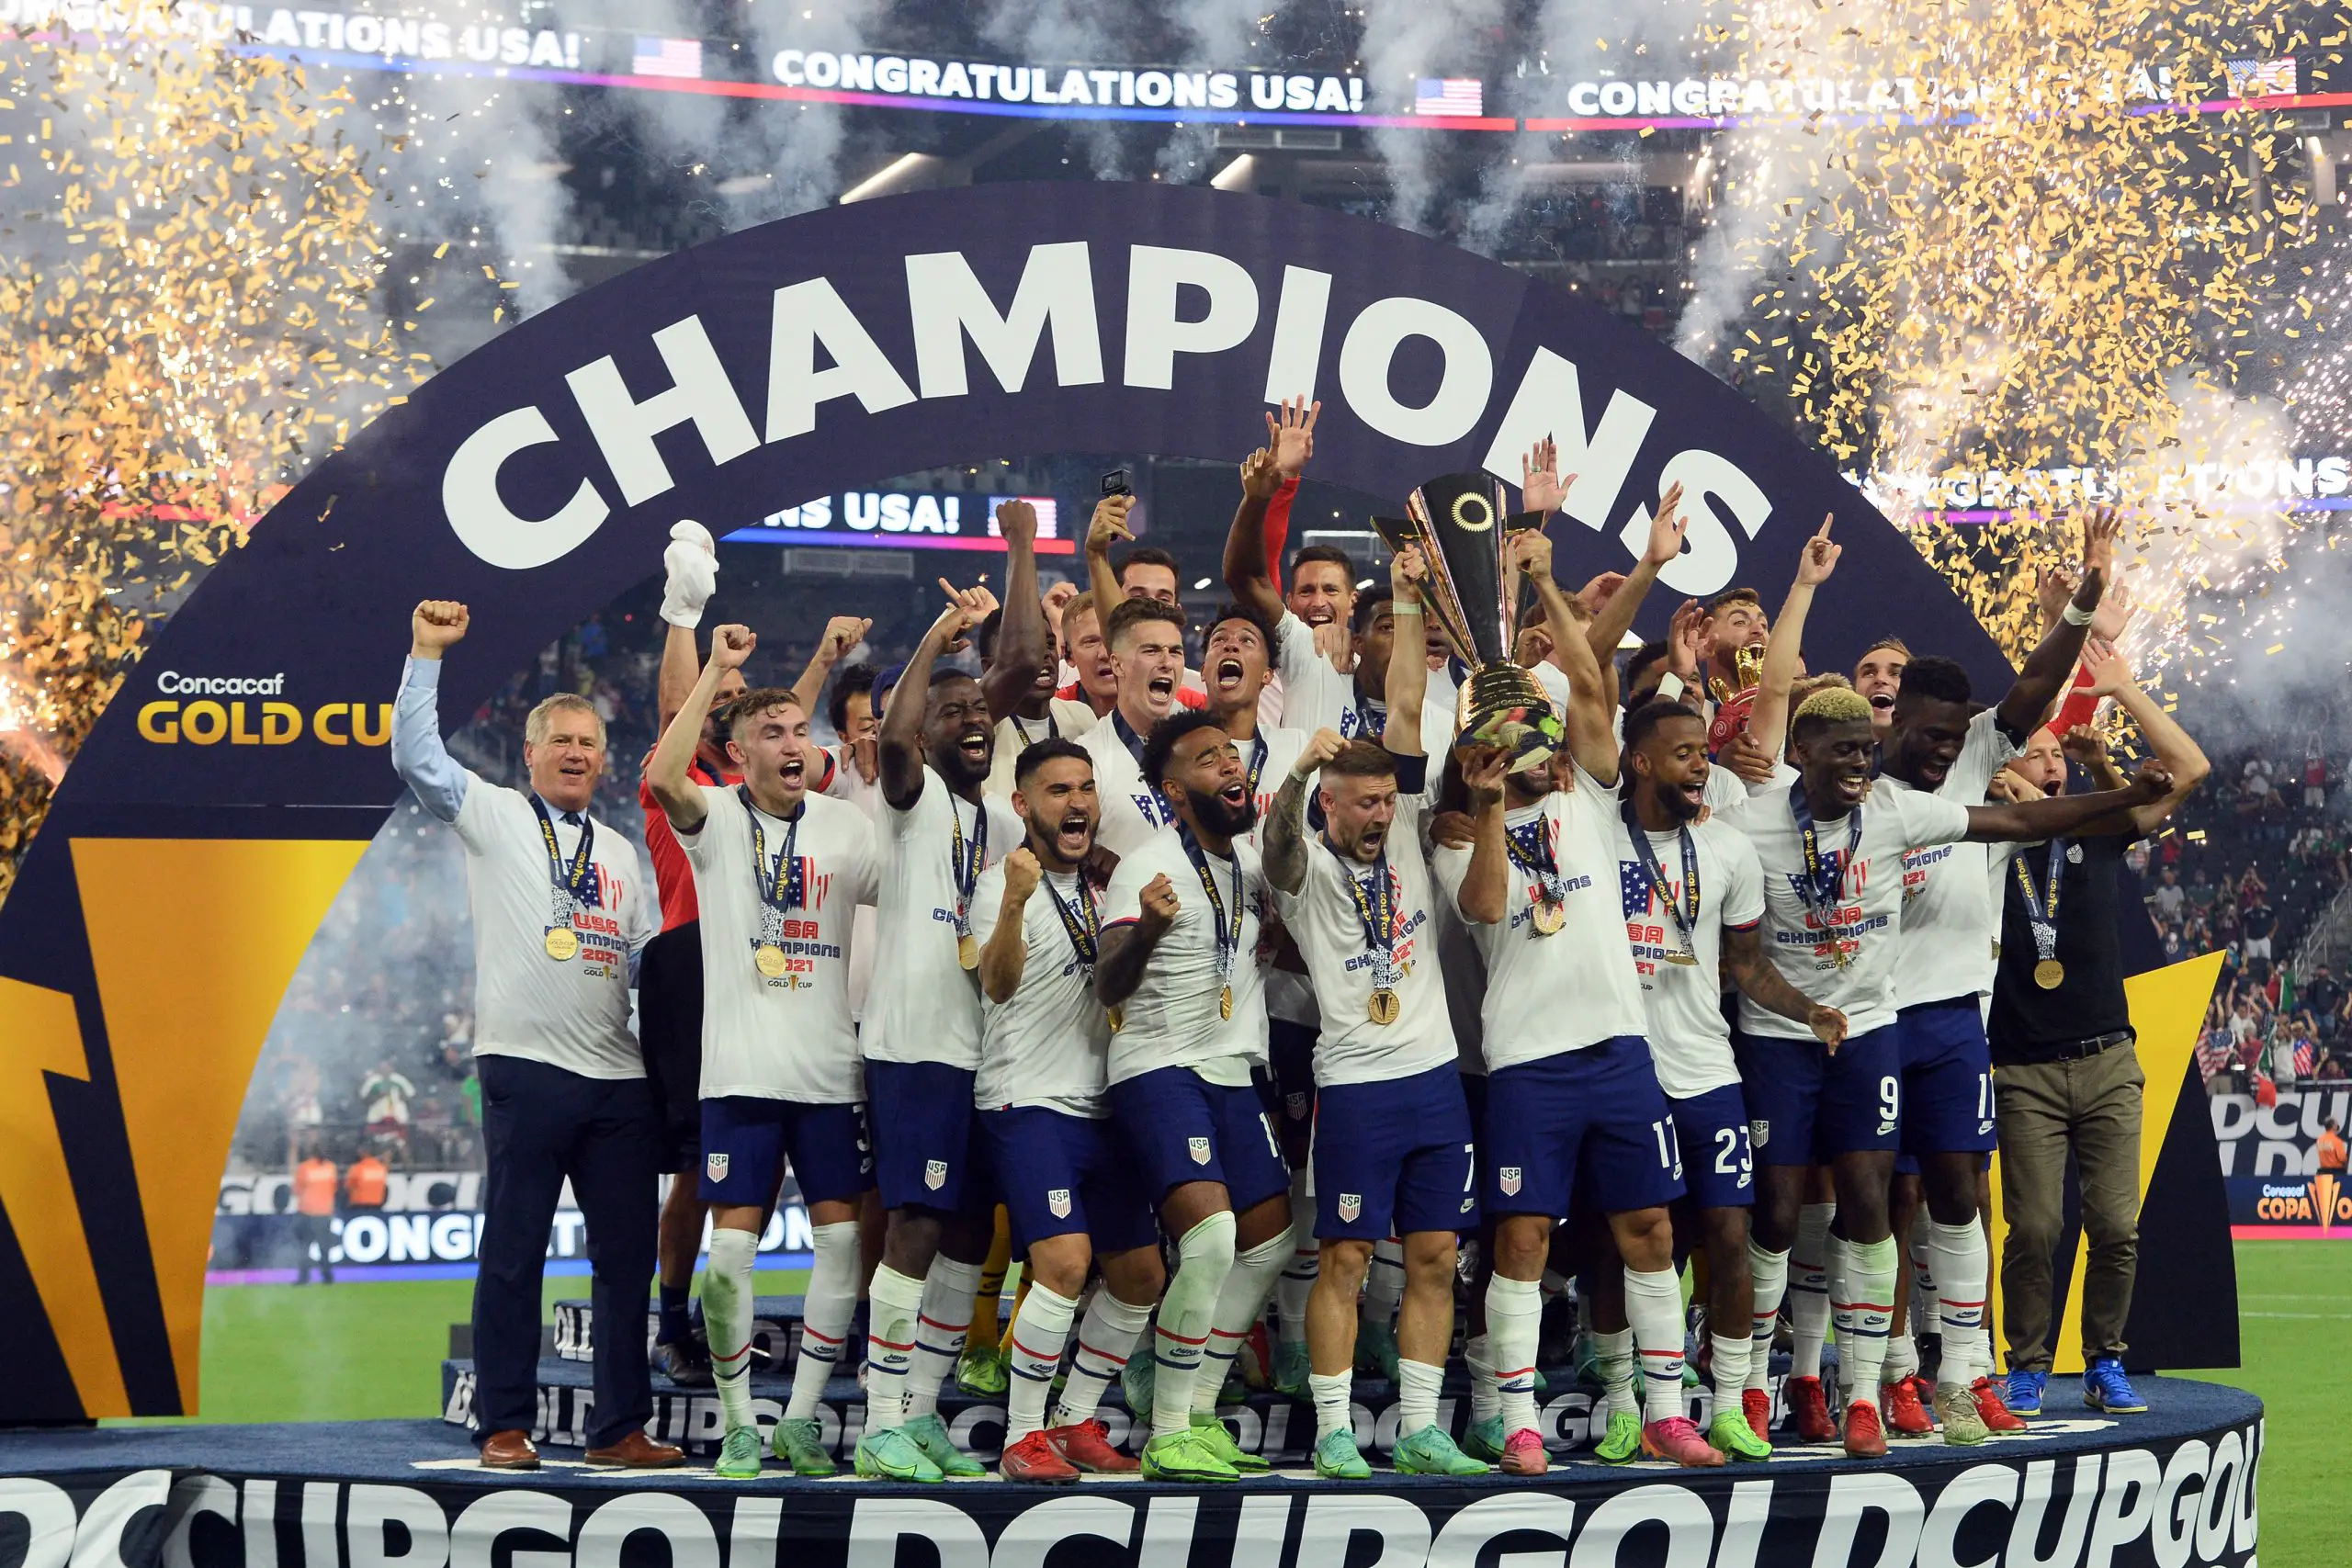 U.S. Men’s Soccer Wins CONCACAF Gold Cup, USWNT Gold Medal Dreams Dashed